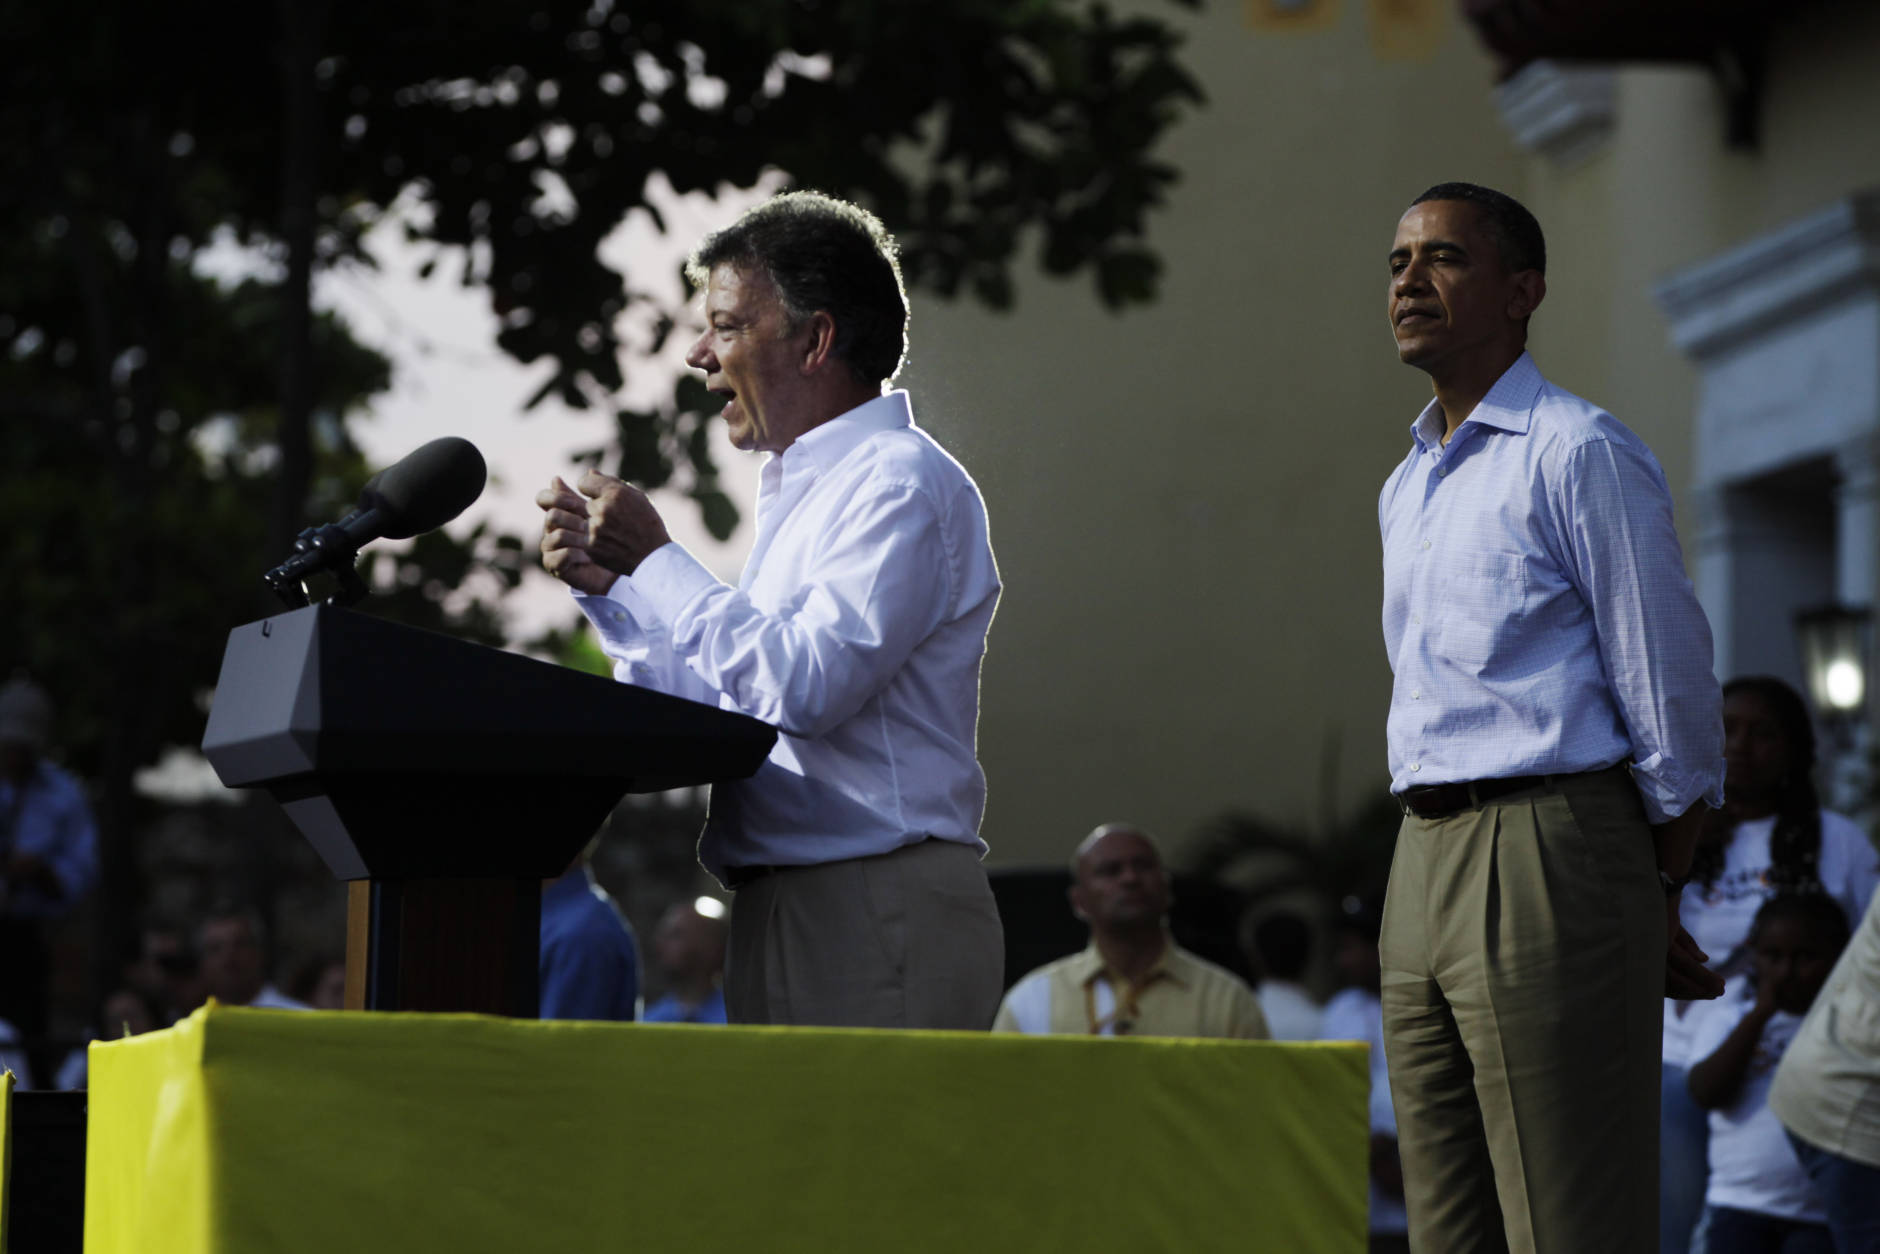 President Barack Obama, right, listens to Colombia's President Juan Manuel Santos during a land titling event for Afro-Colombian communities in Cartagena, Colombia, Sunday, April 15, 2012. (AP Photo/Carolyn Kaster)